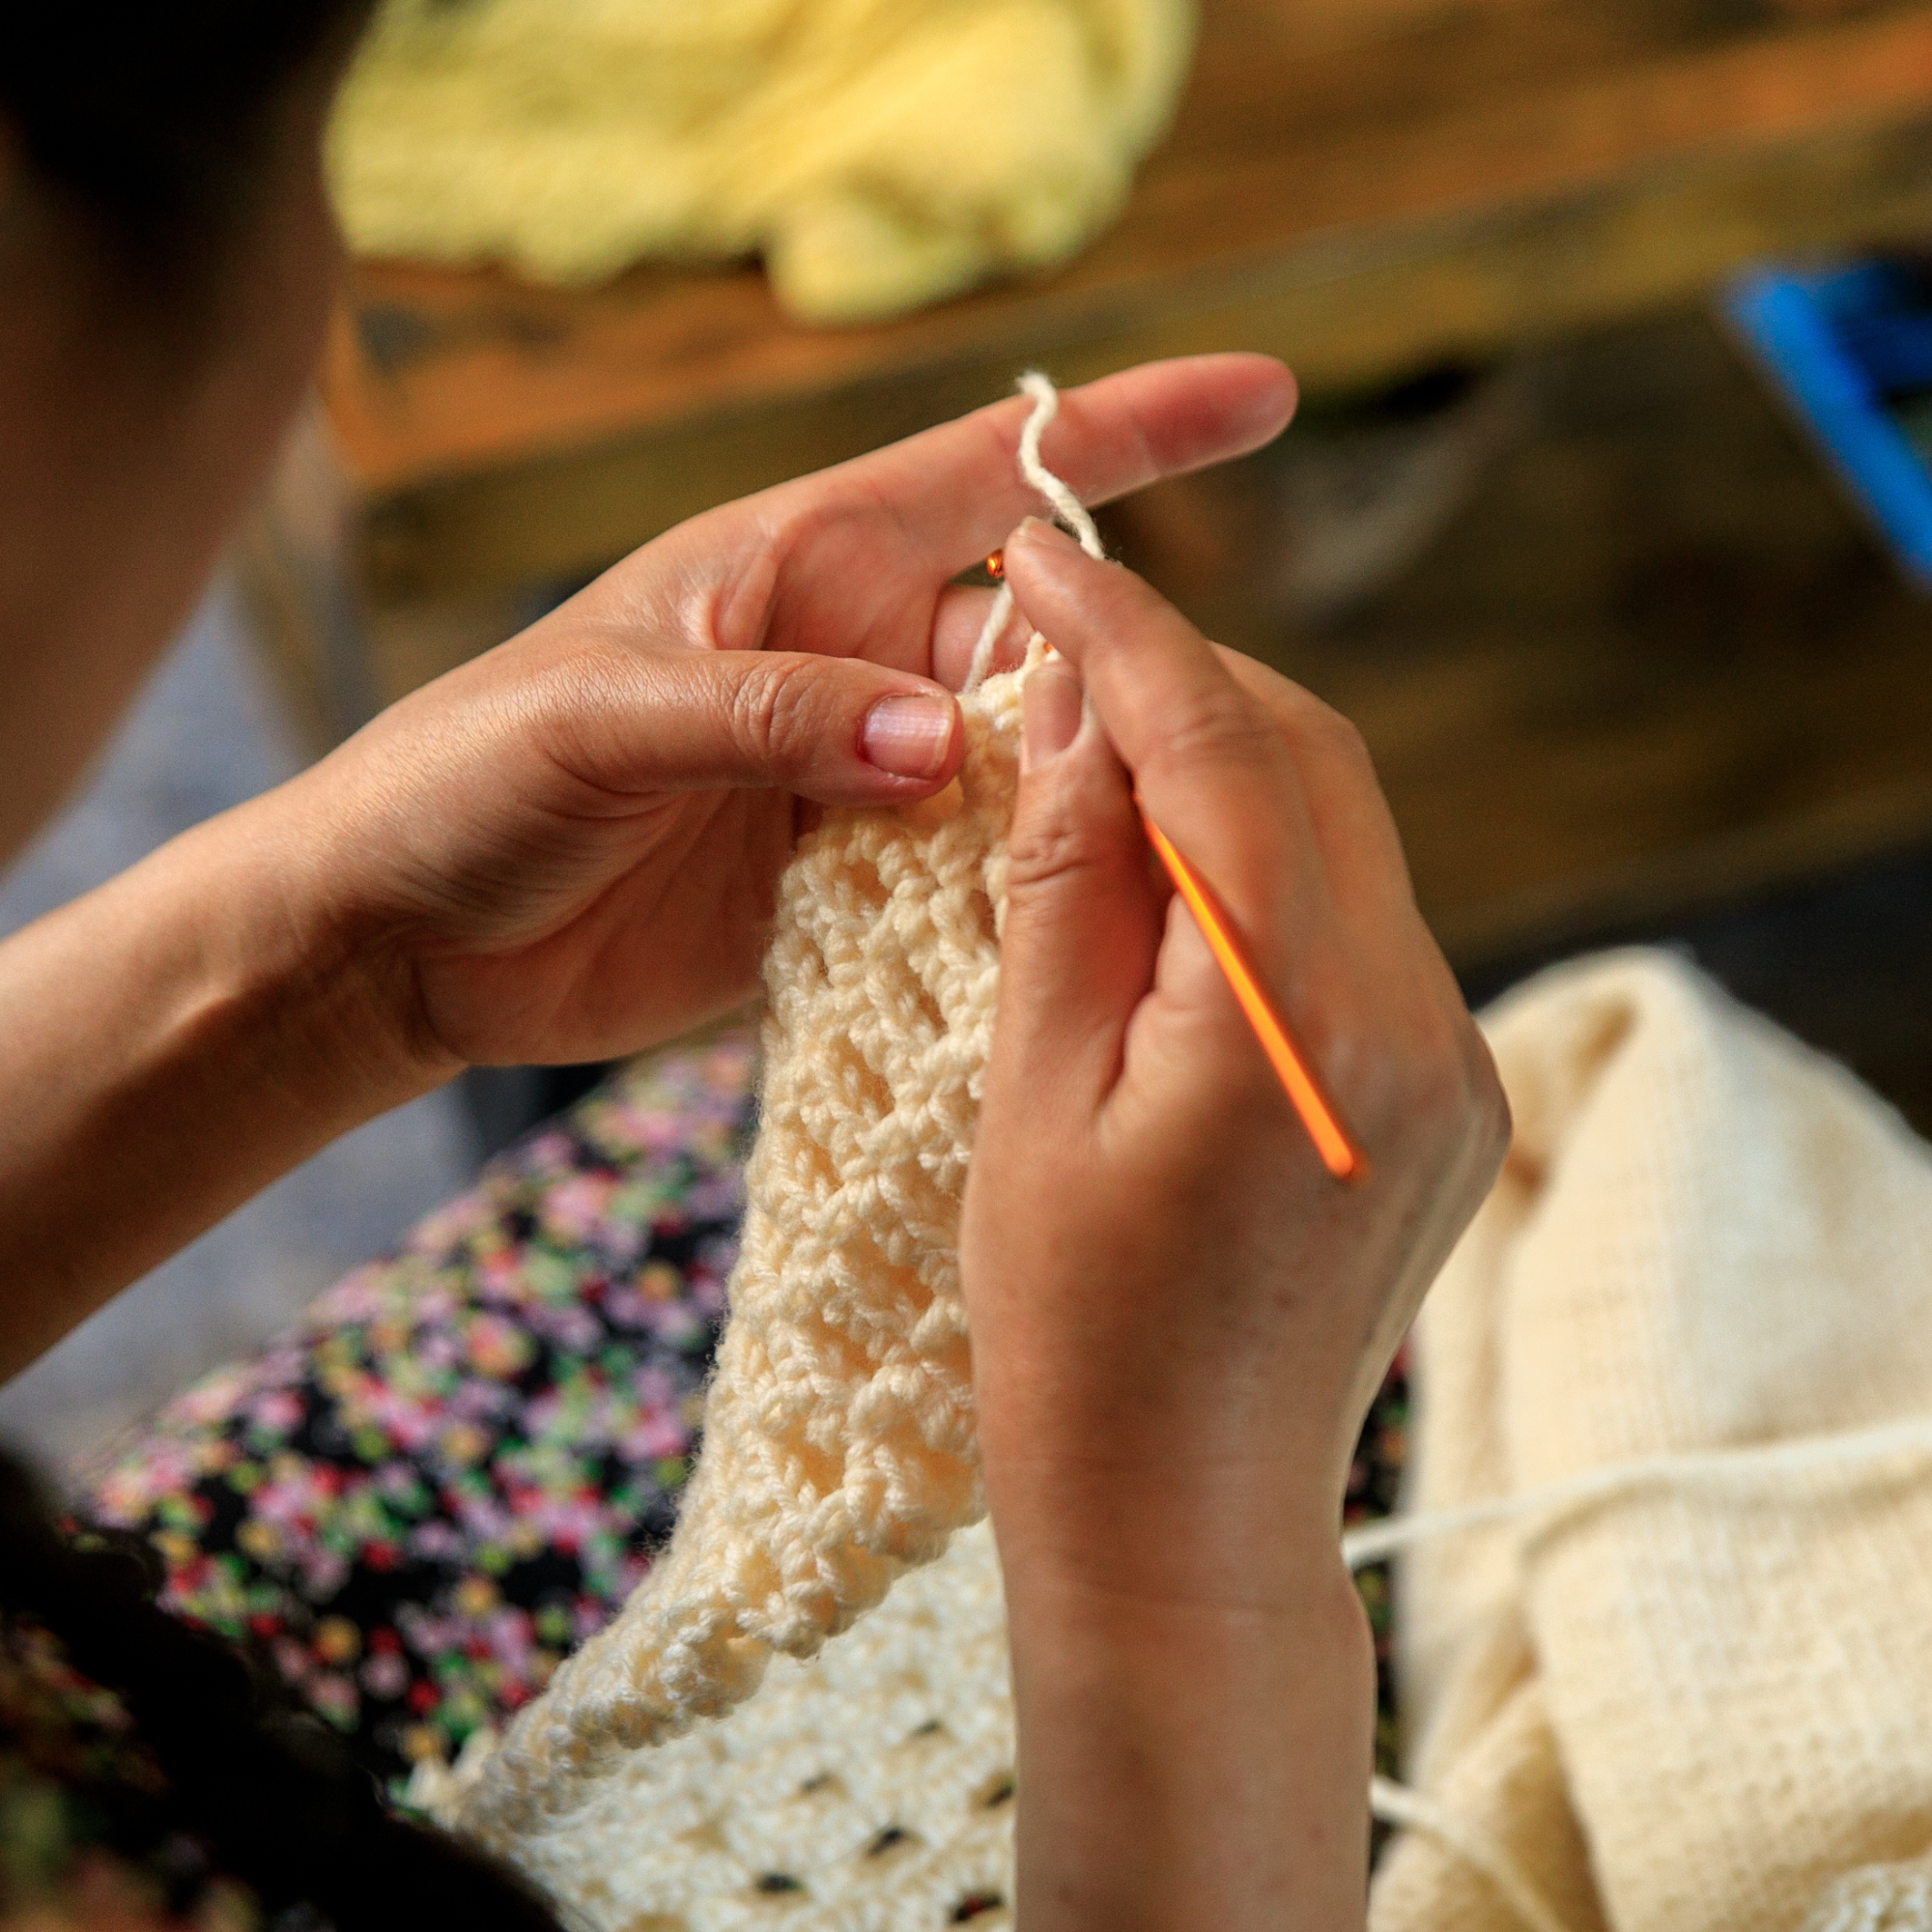 Photo depicting someone crocheting with white yarn.